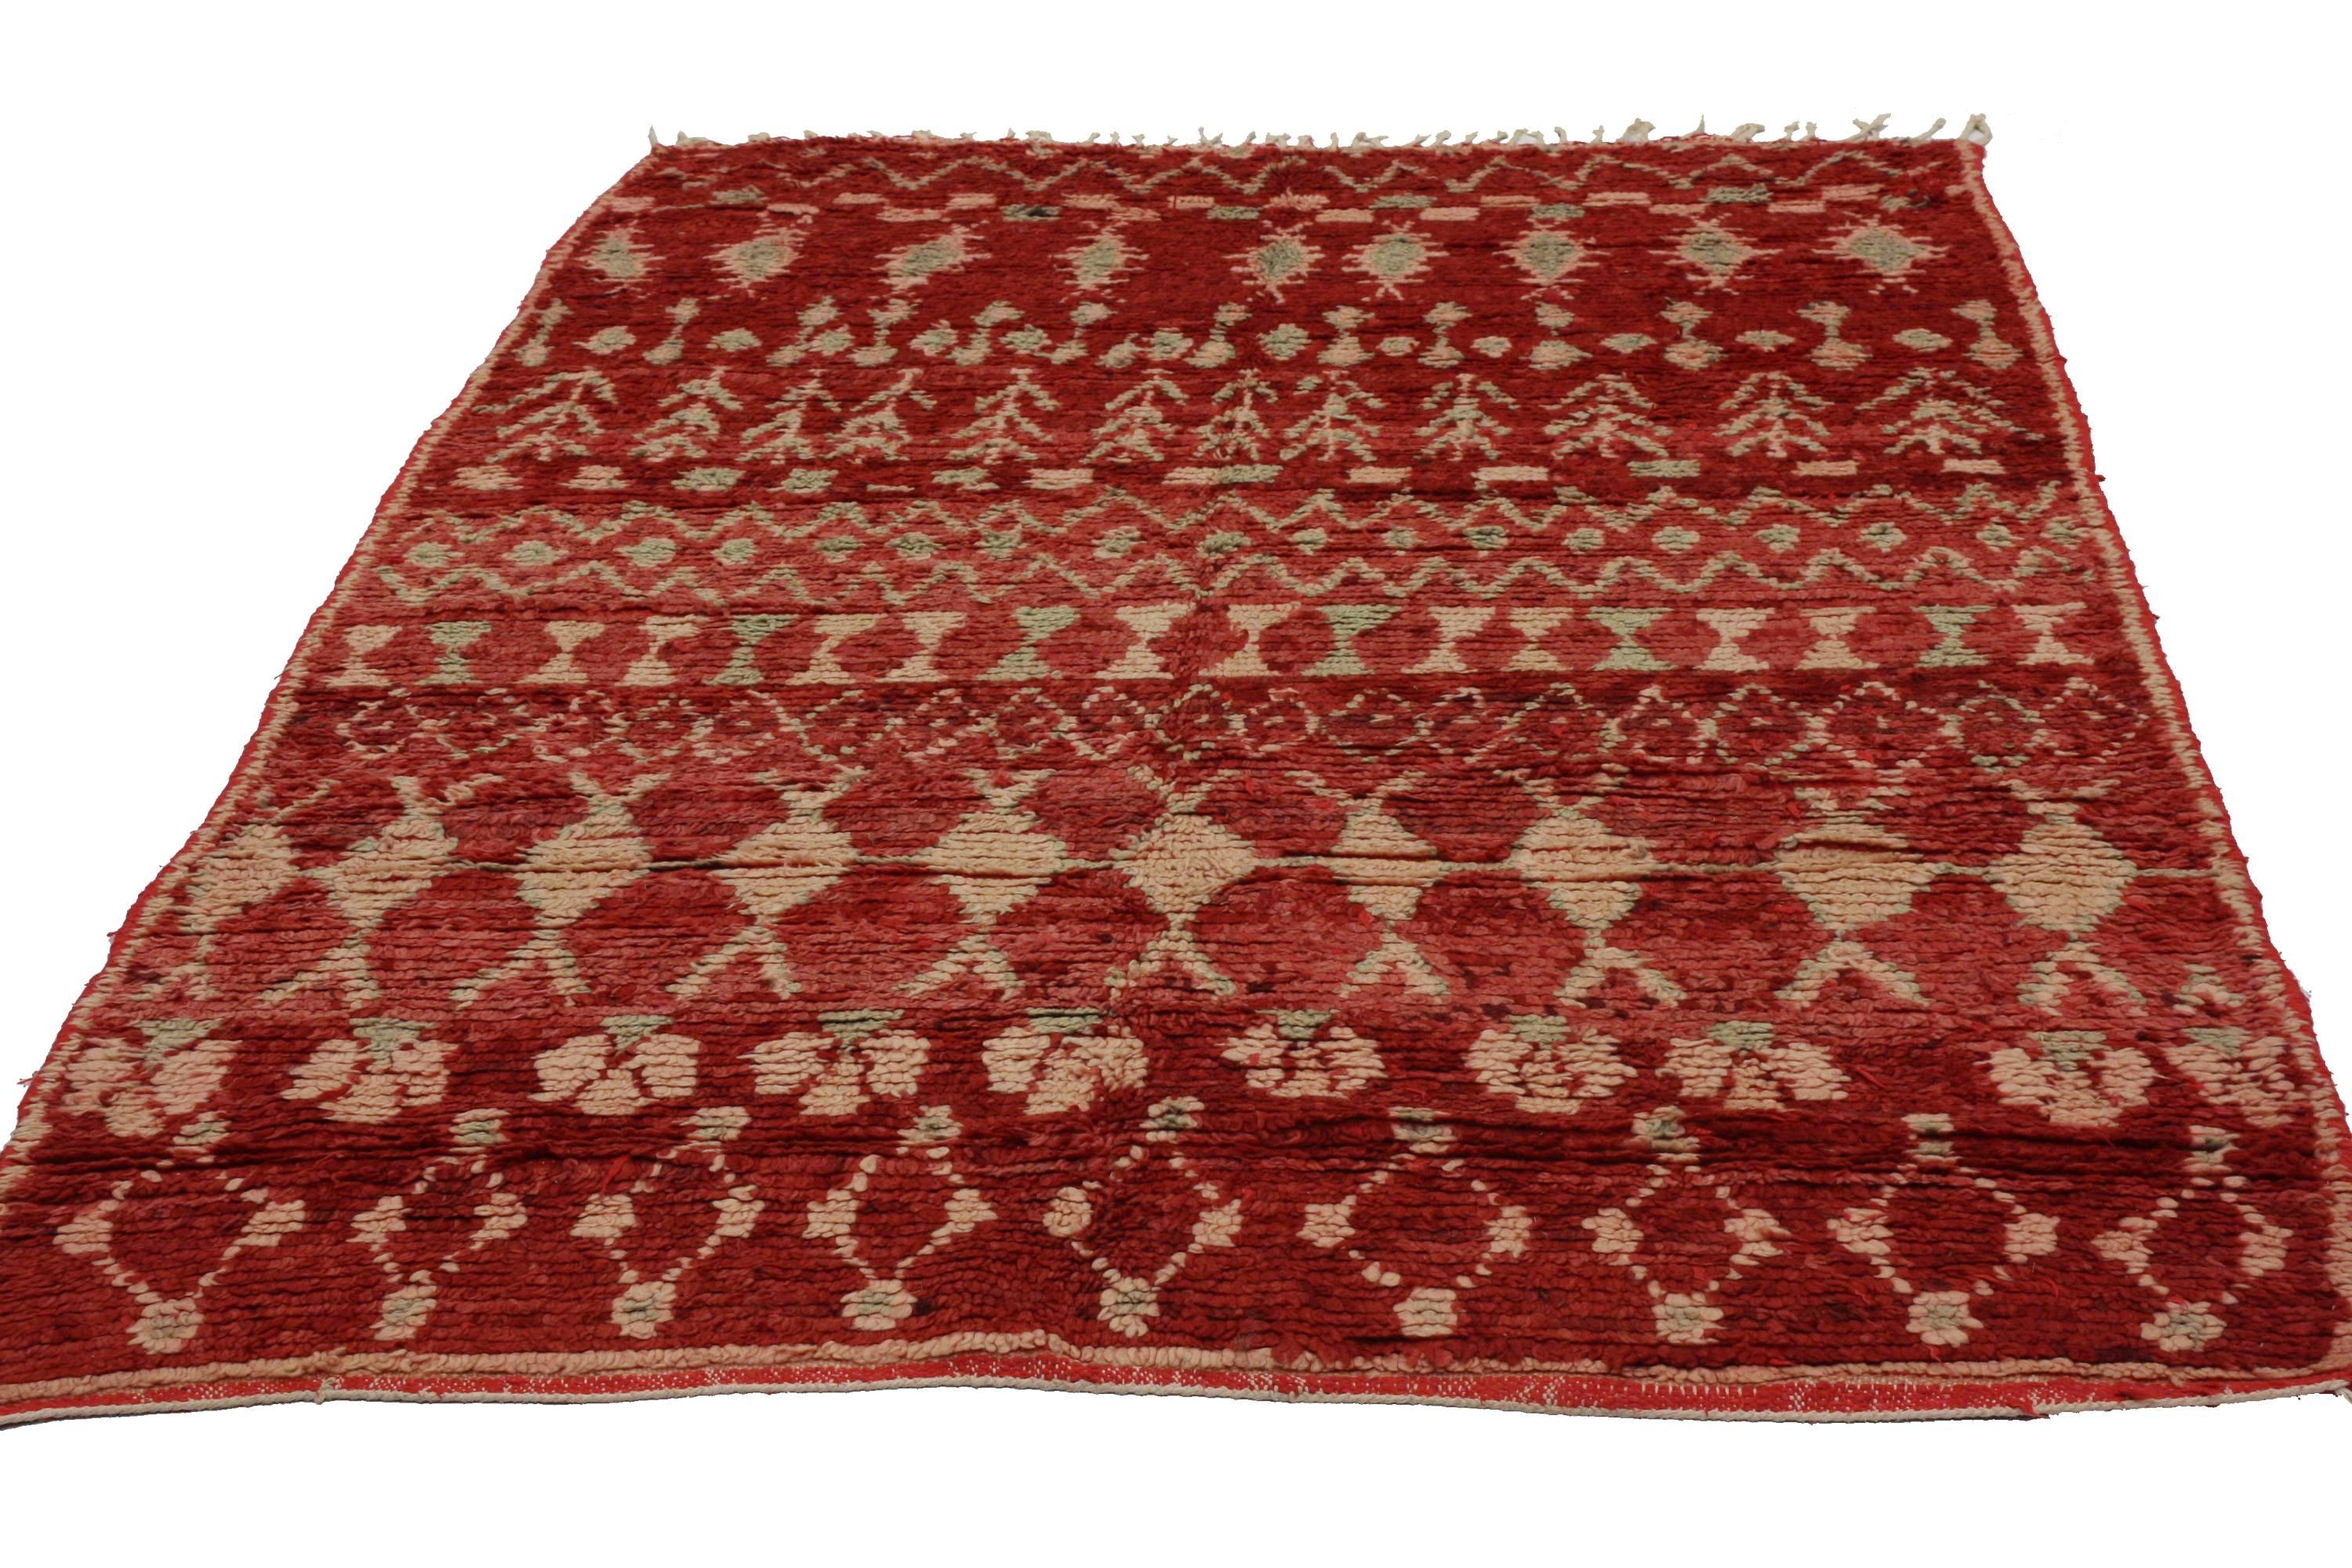 With the dramatic red color and plush pile of this Berber Moroccan rug, you can have your own red carpet moment anytime. Sizzling red hot or seductively sedate, the color red is not for the timid. Unlock the secrets with this striking, Berber